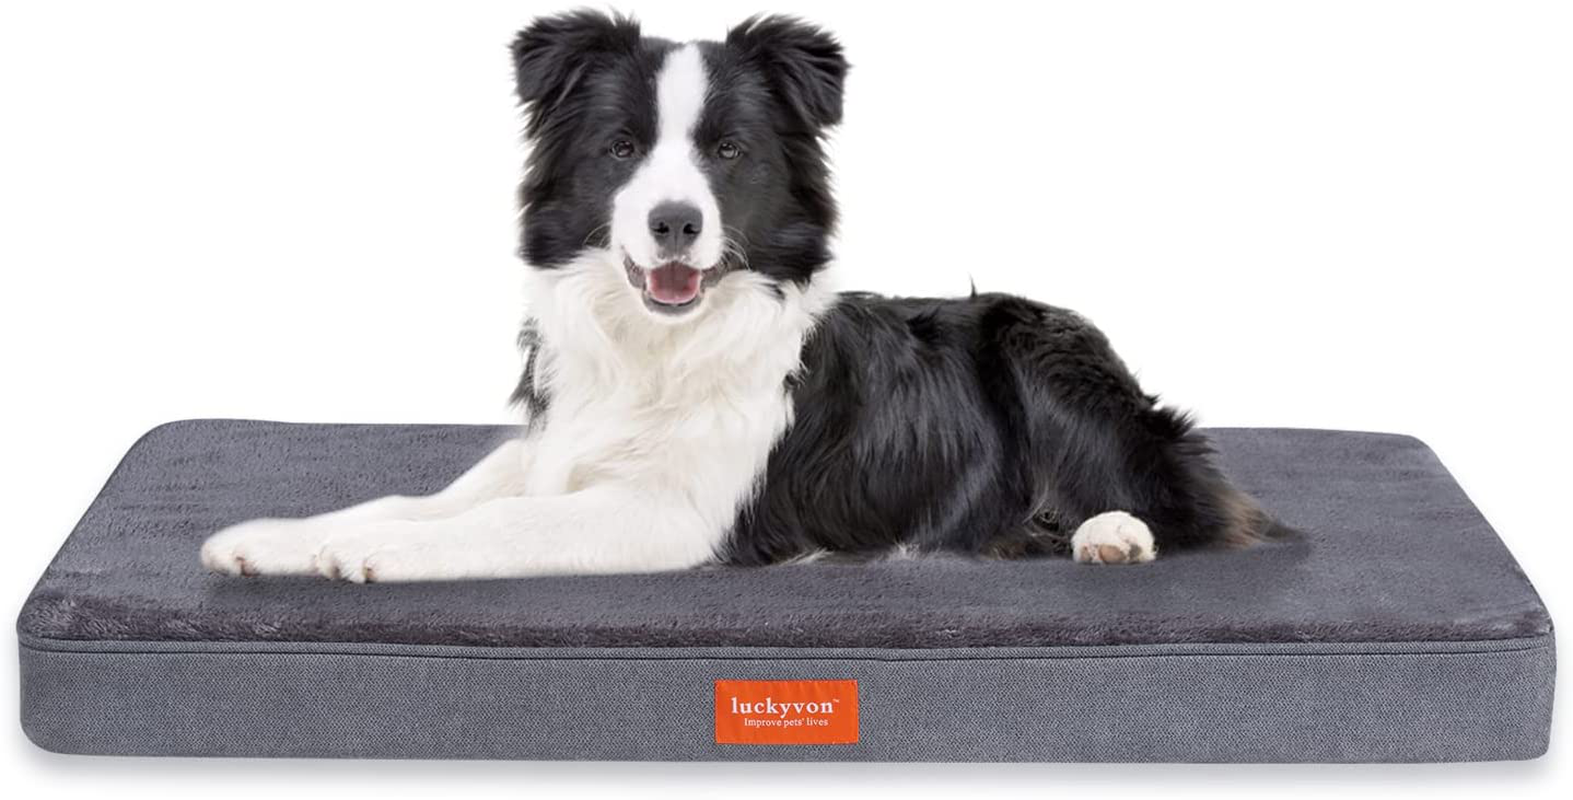 Luckyvon Large Dog Bed, Orthopedic Memory Foam Dog Bed, Large Dog Bed with Removable Plush Cover ,Waterproof Lining and Nonskid Bottom Dog Couch,Dog Mattress Suitable for 30 Lbs to 200 Lbs